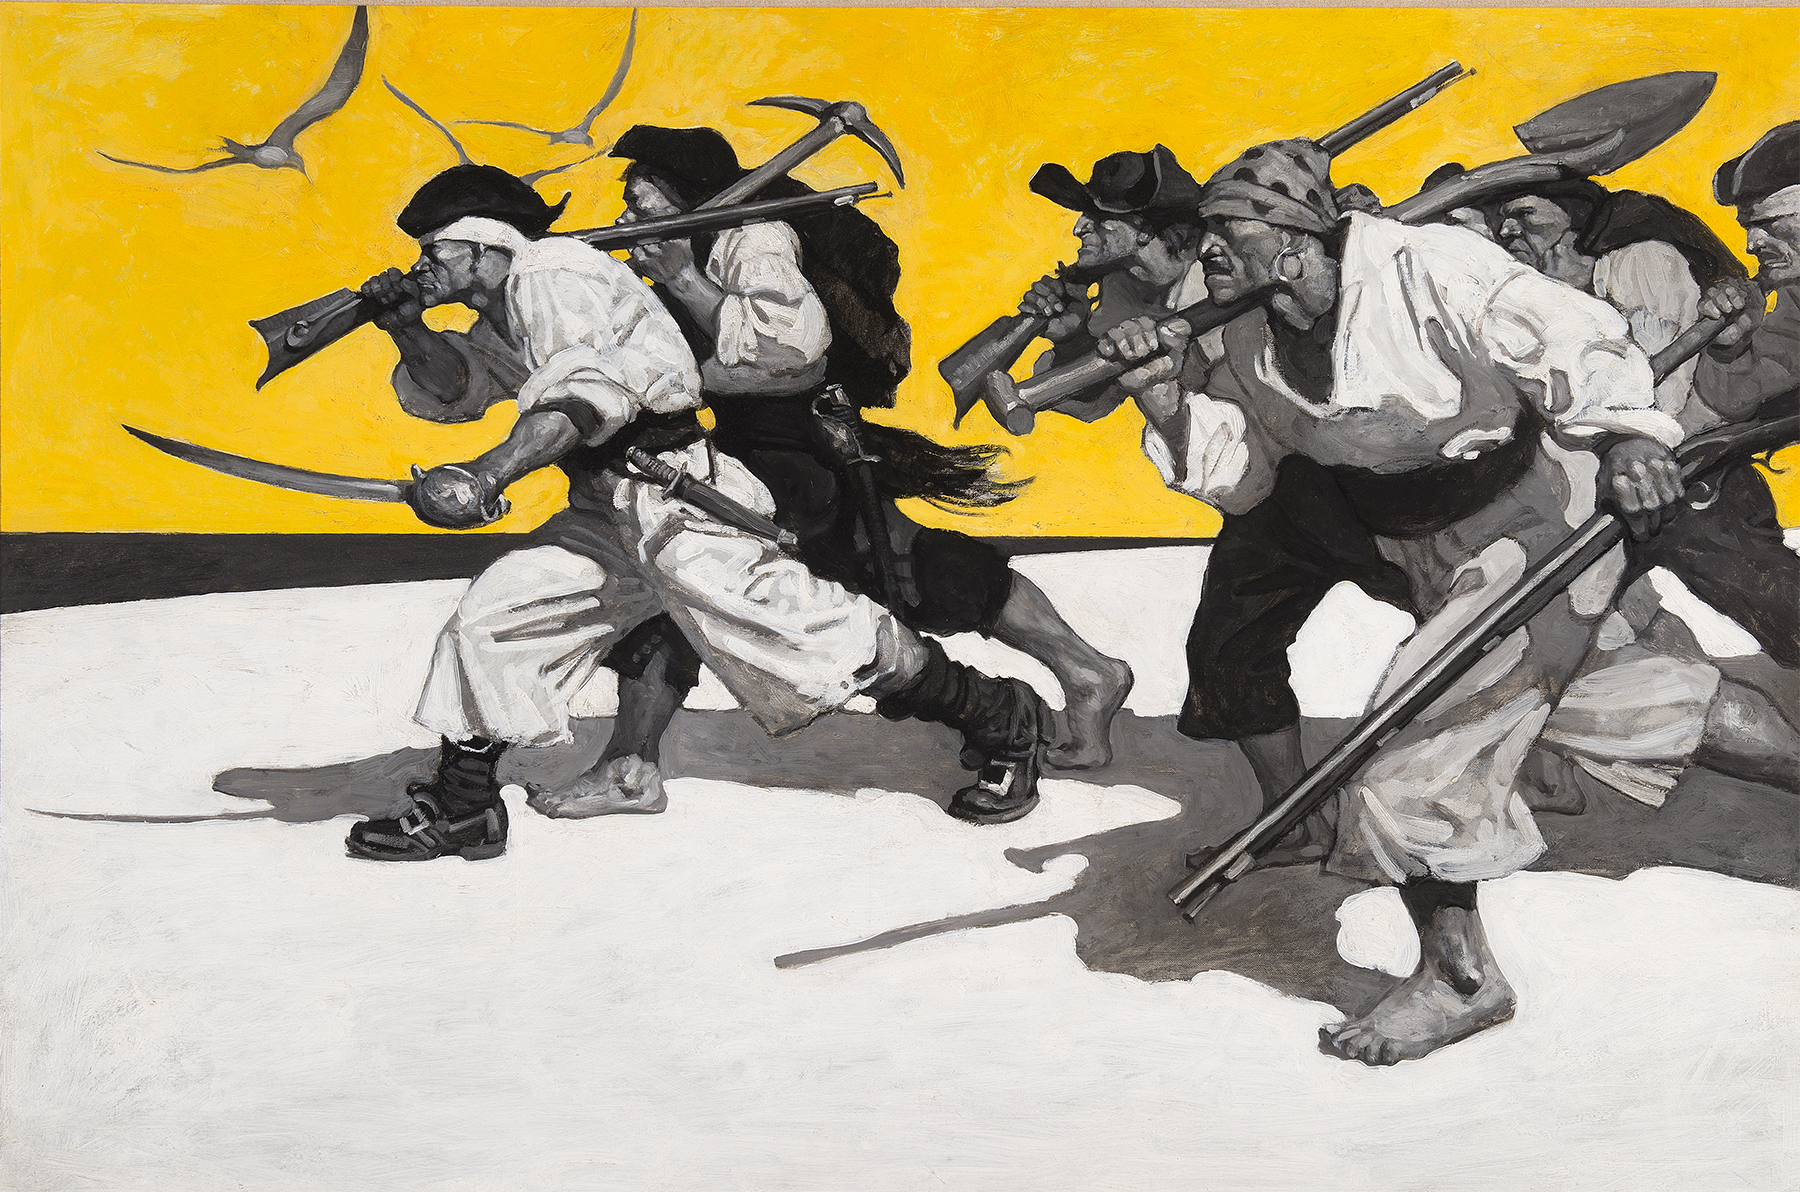 A black and white group of pirates holding weapons walk on a beach among a pure yellow sky.